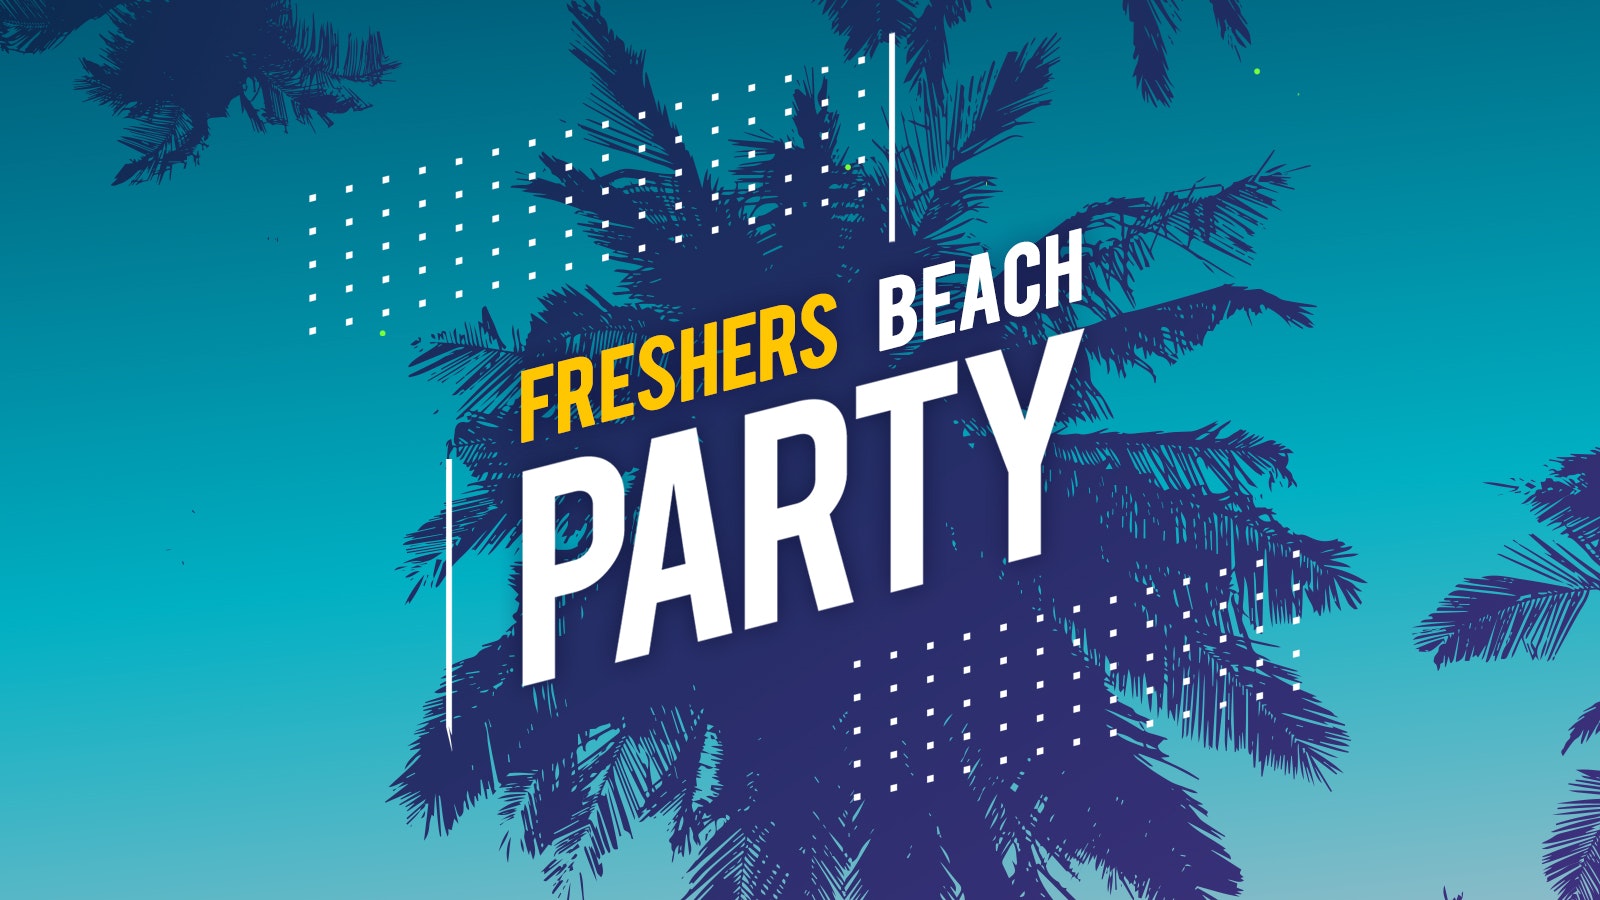 Freshers Beach Party | Coventry Freshers 2019